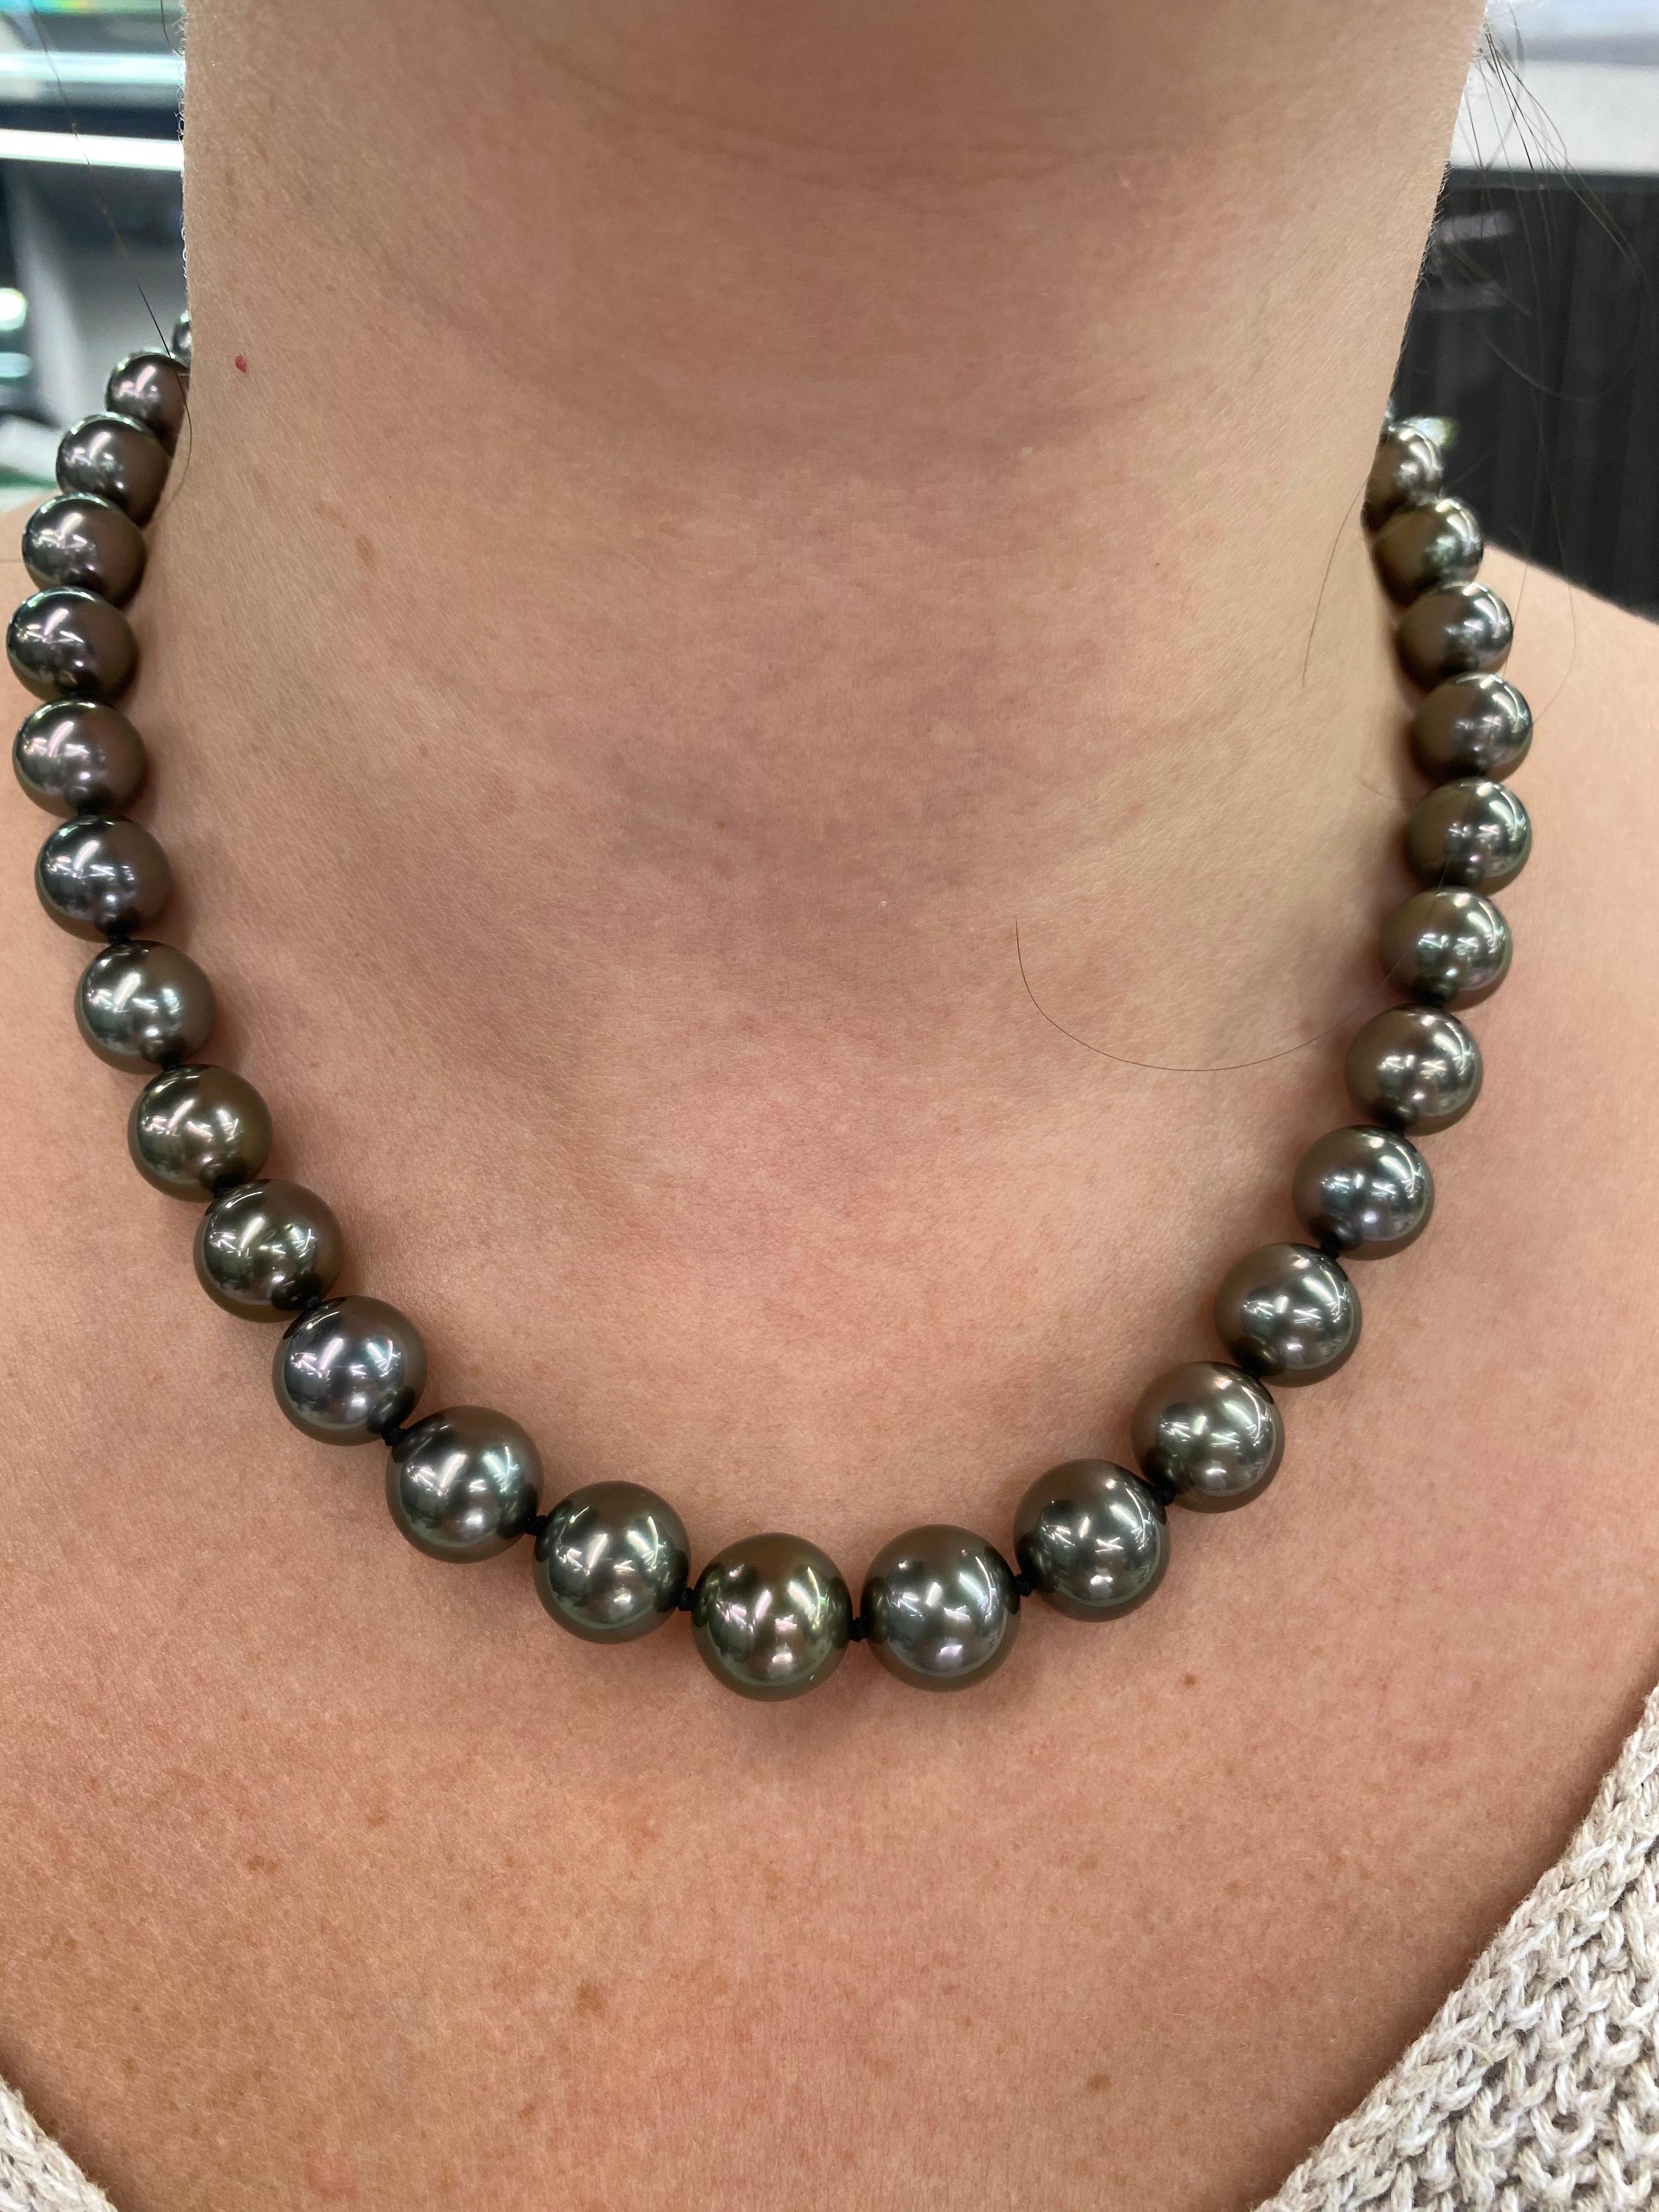 Perfectly matched pearl strand necklace featuring 37 Tahitian pearls measuring 10-12 mm with a high polish ball clasp in 14K White Gold. 

Pearl quality: AAA
Pearl Luster: AAA Excellent
Nacre : Very Thick

Strand can be made to order, shortened or